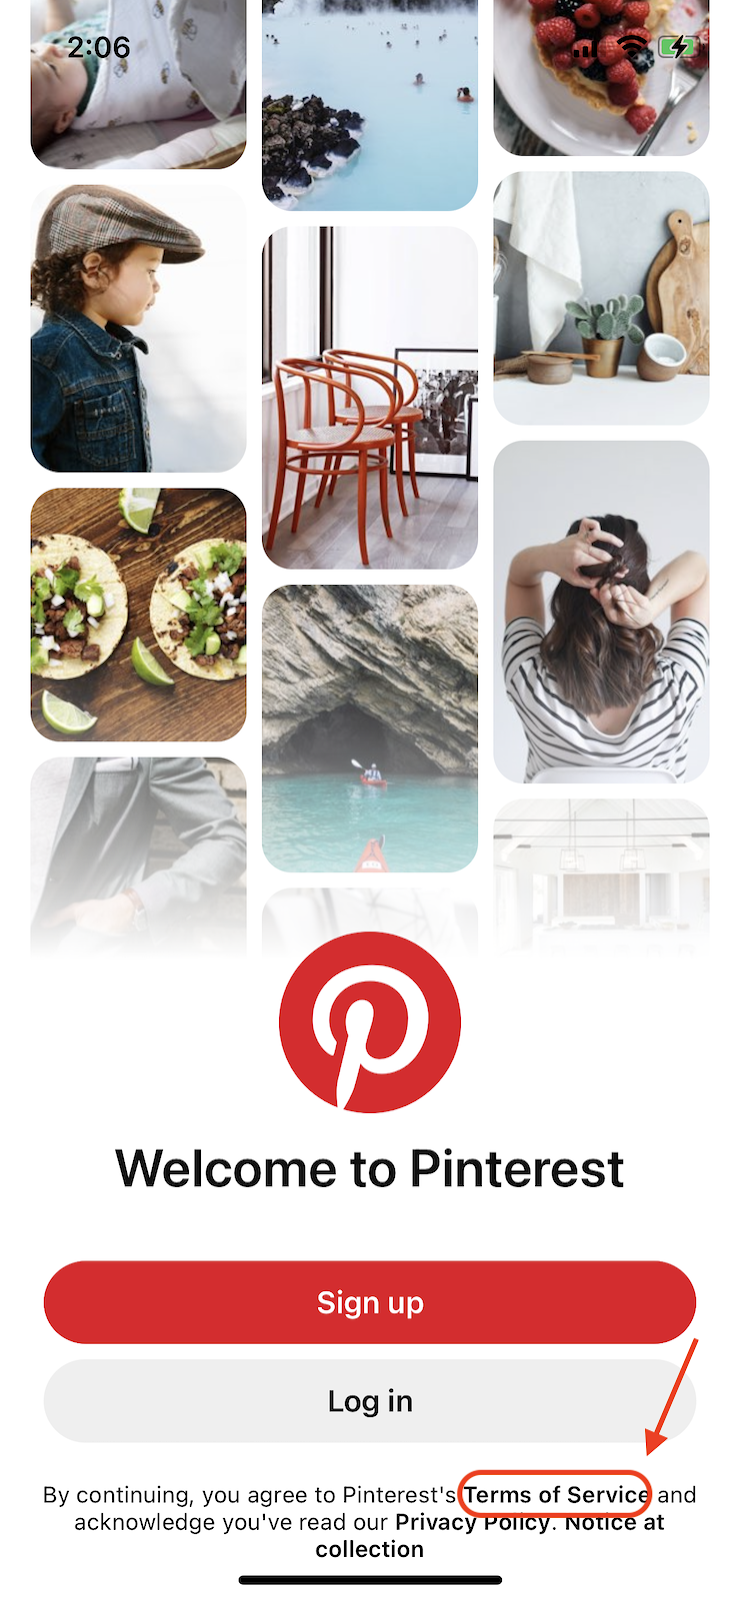 Pinterest-links-terms-and-conditions-new-users-sign-up